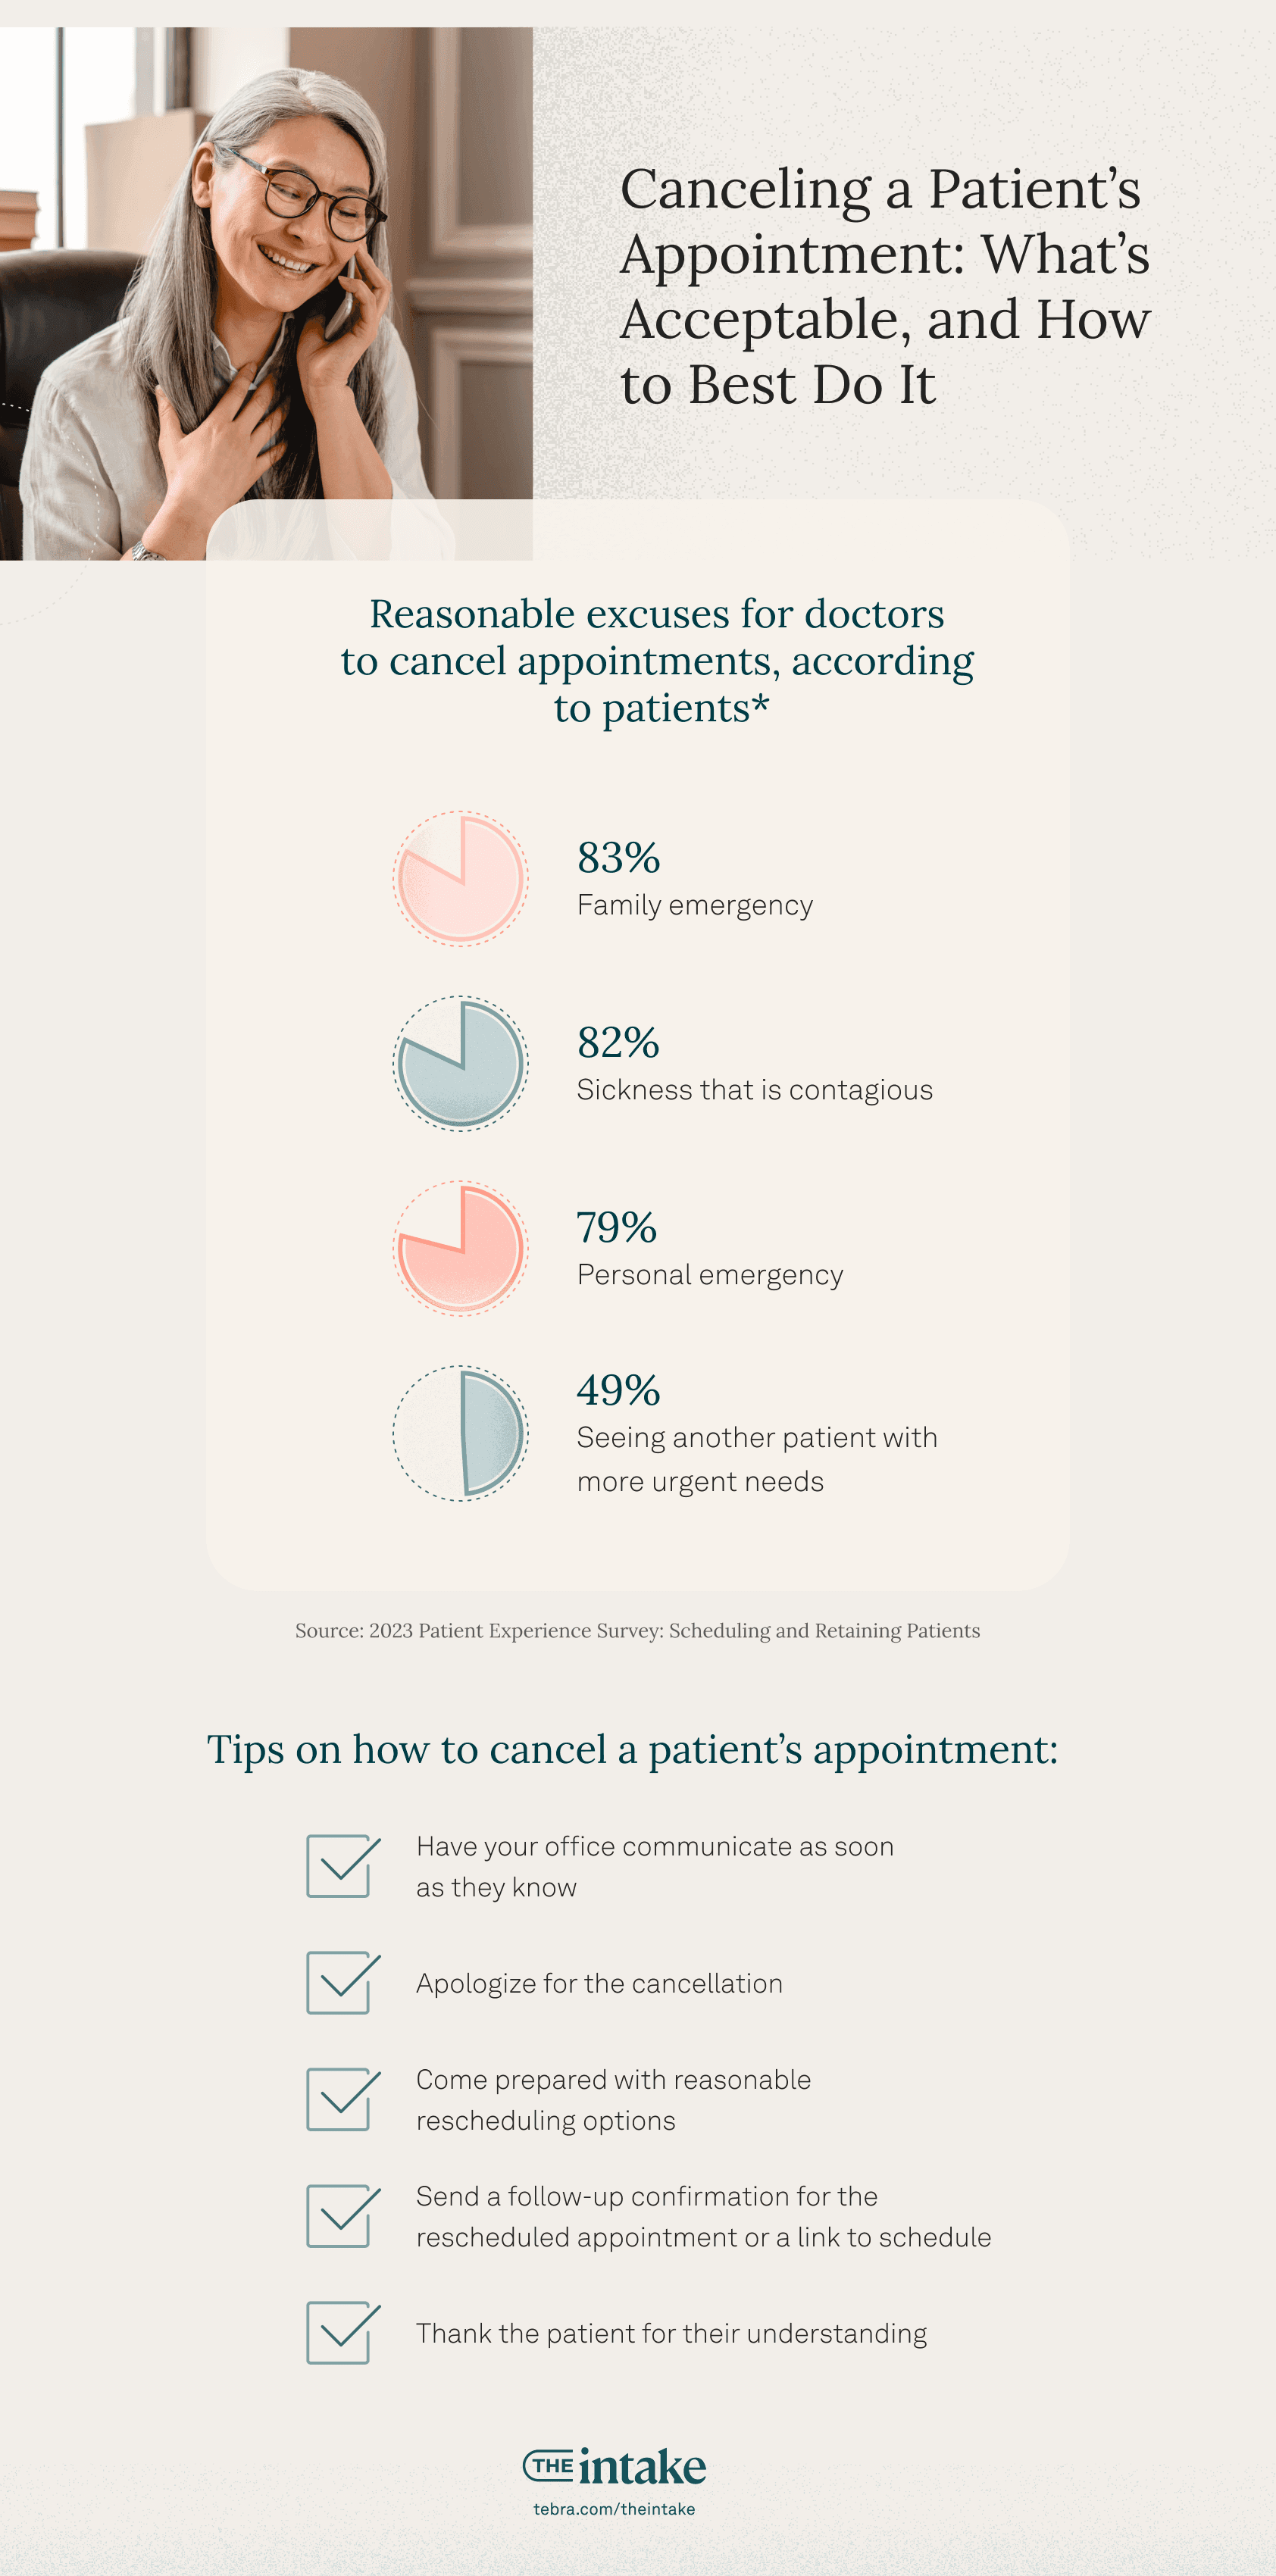 Graphic with research around what patients think is reasonable for doctors to cancel appointments, along with tips for practices on how to cancel a patient's appointment